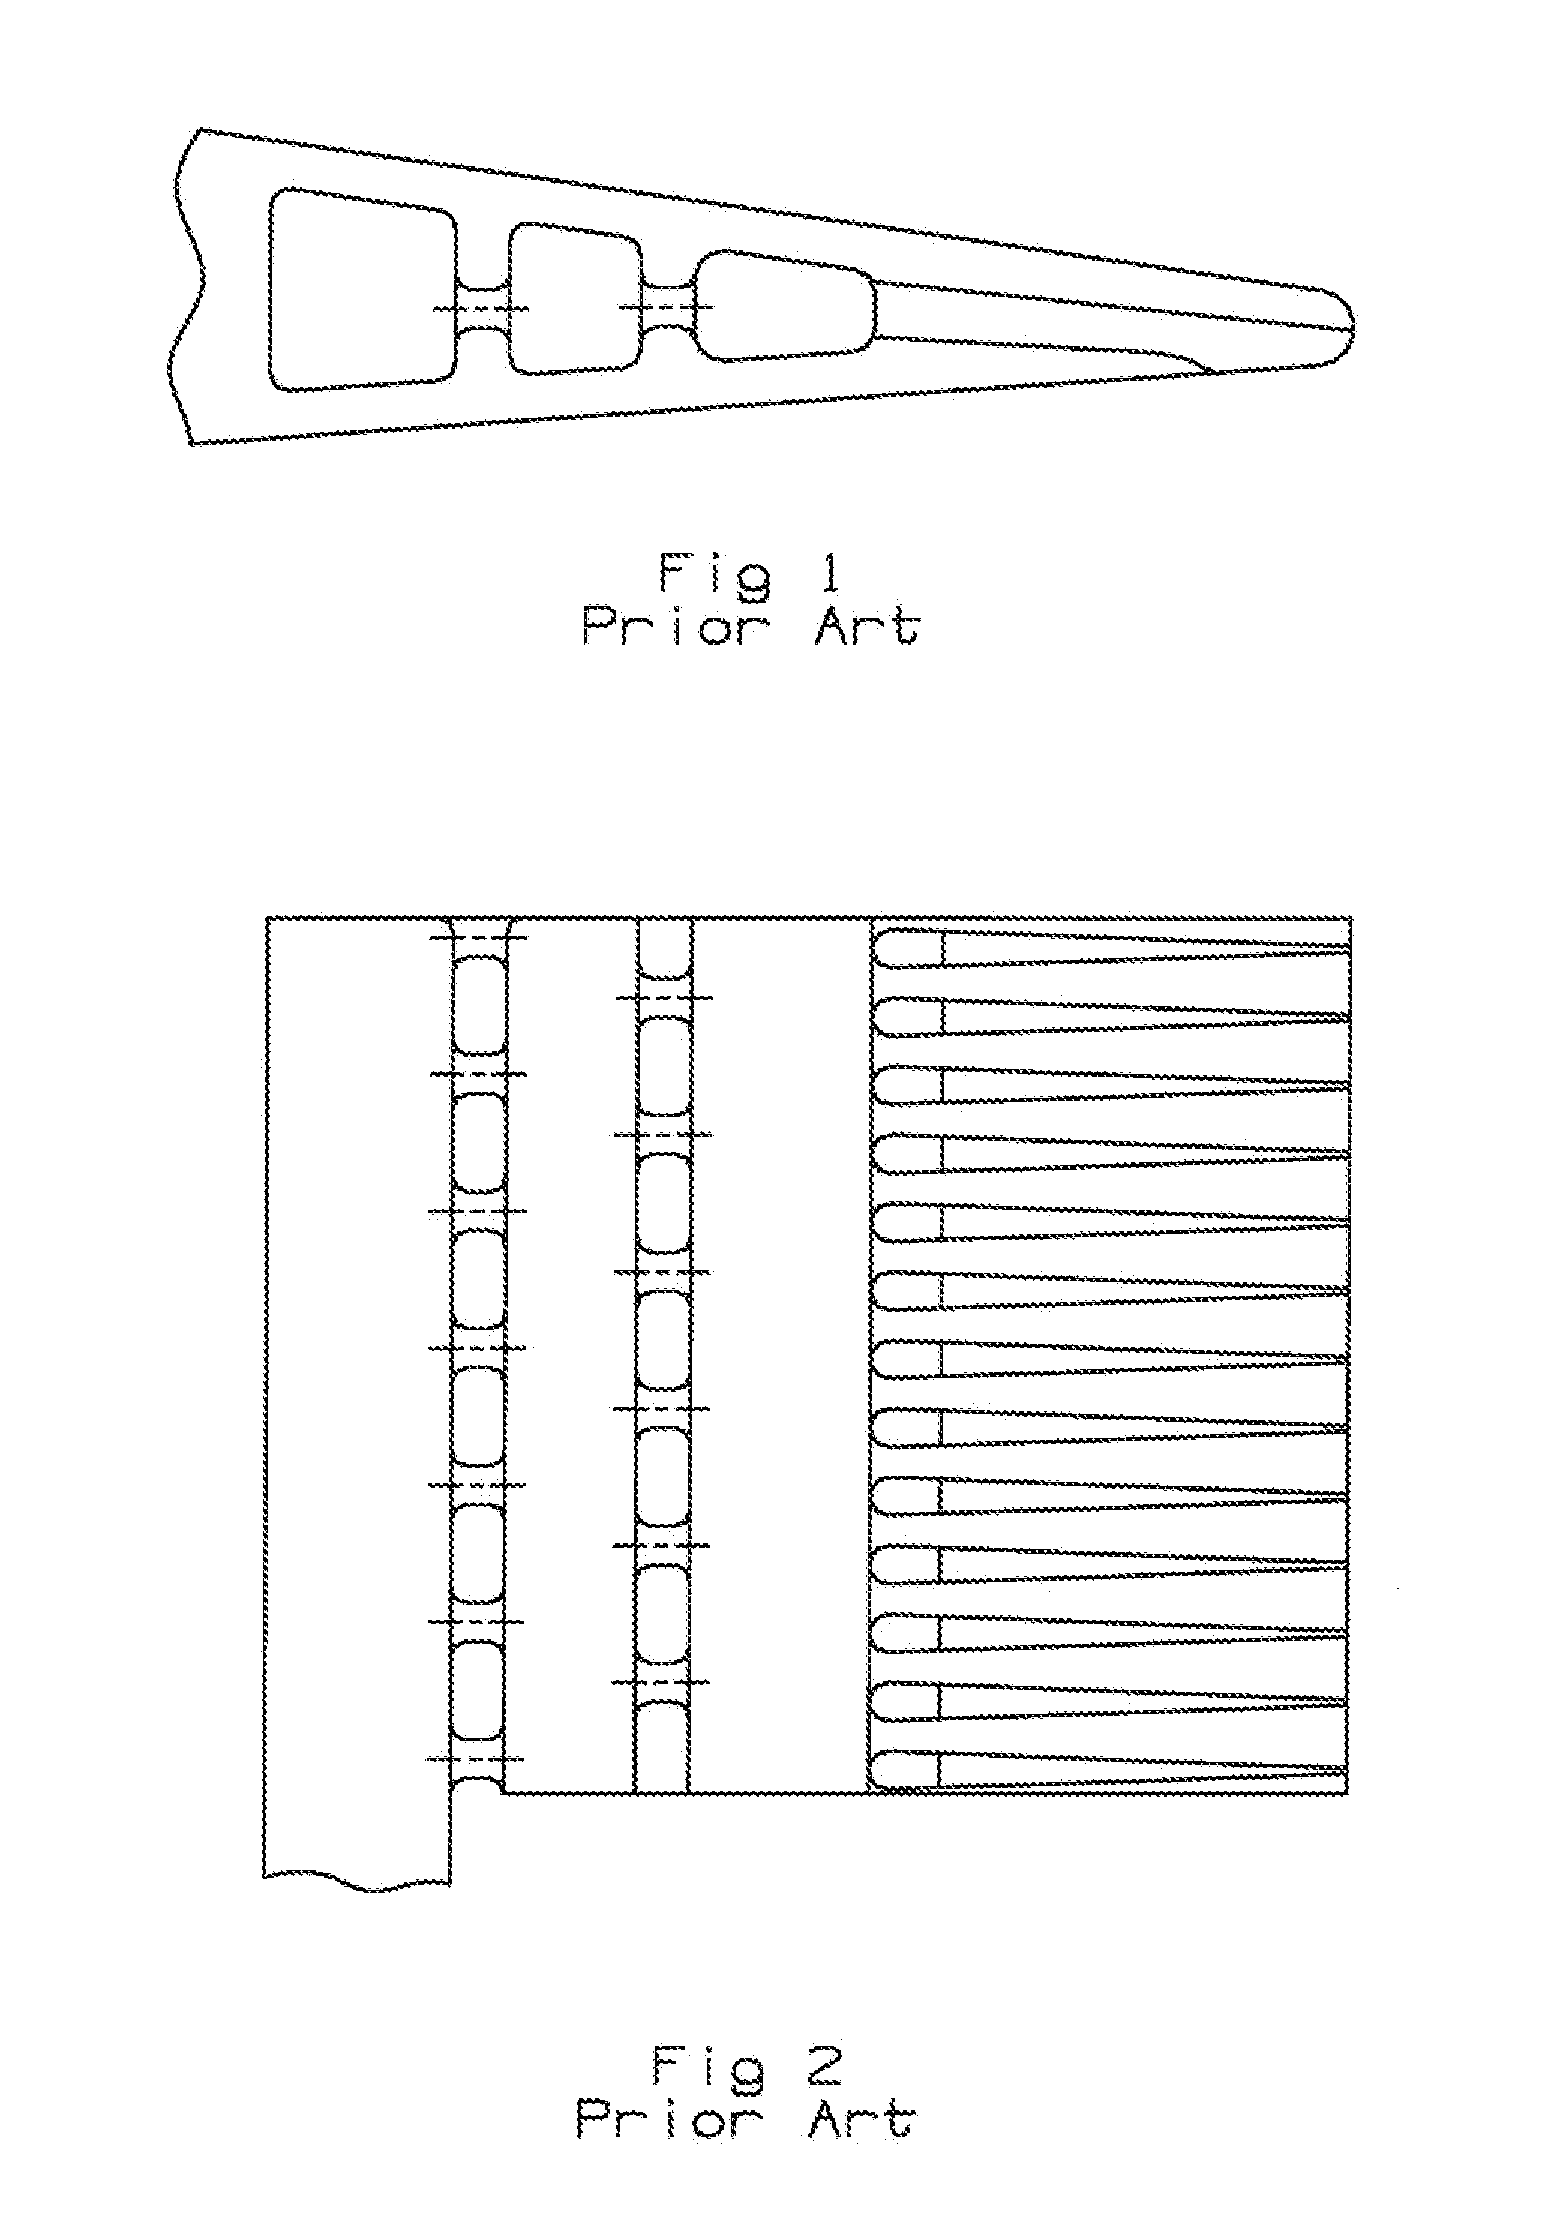 Turbine airfoil with micro cooling channels